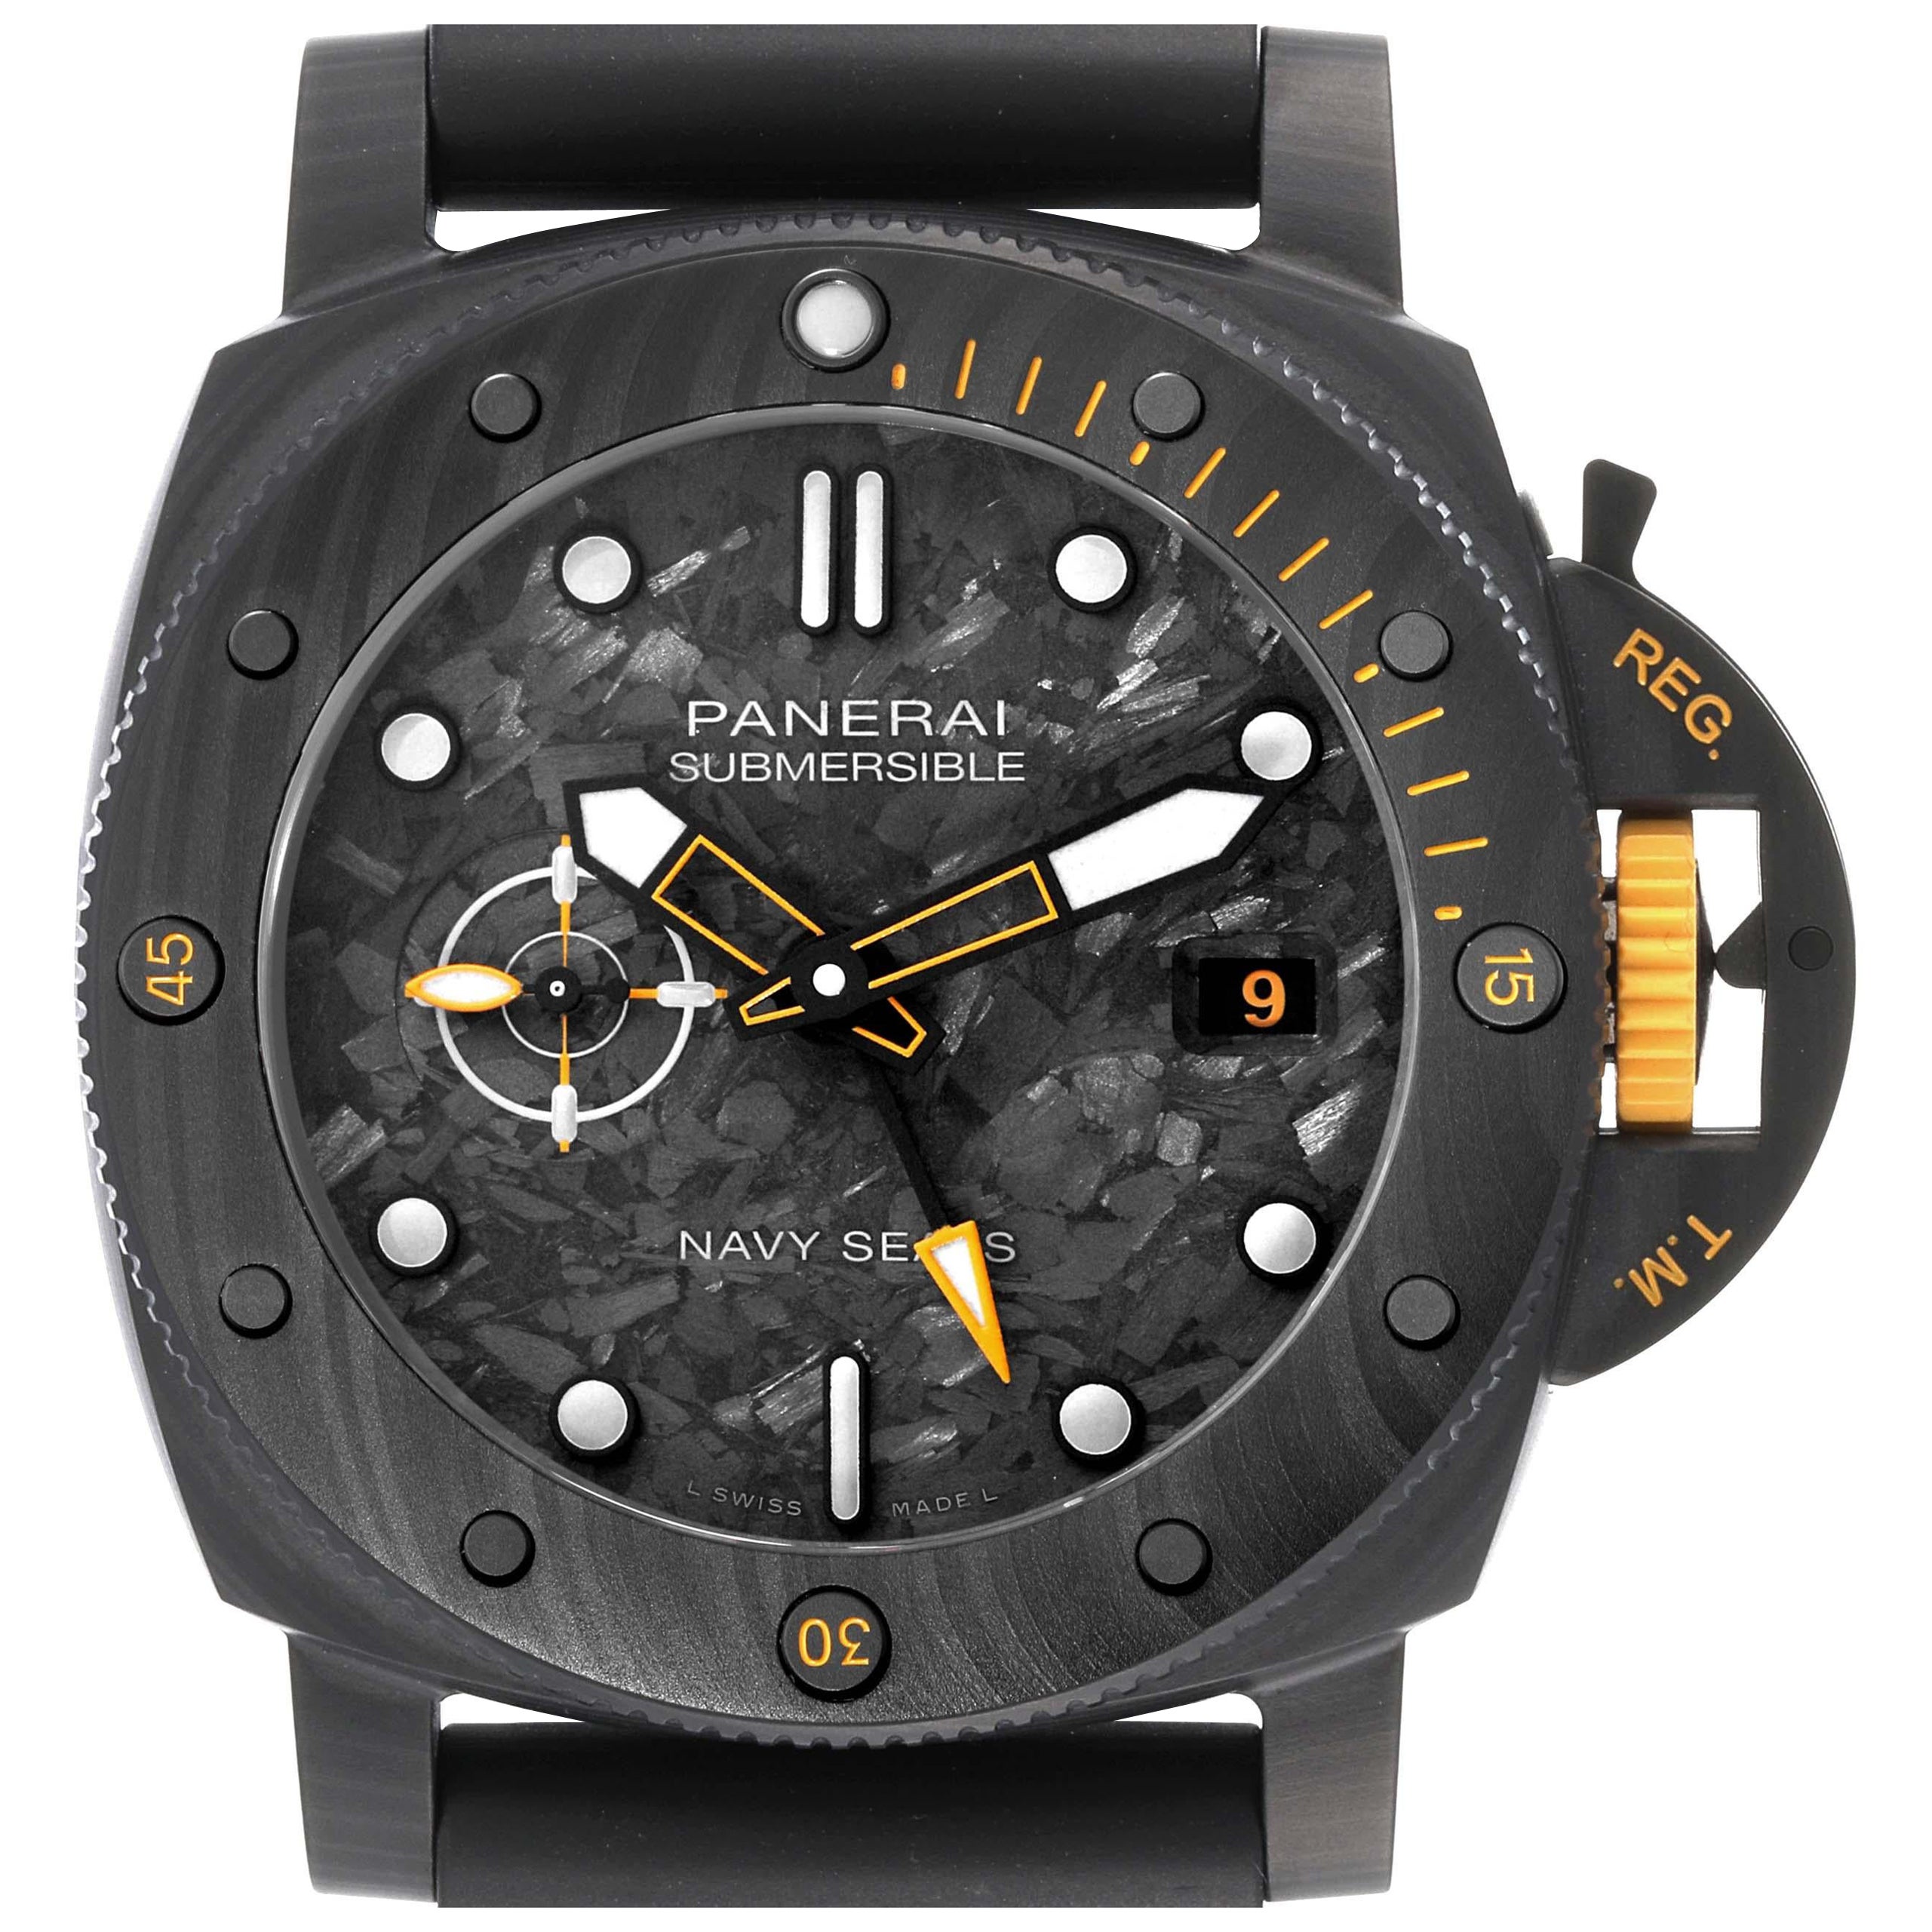 Panerai Submersible GMT Navy Seals LE Carbotech Mens Watch PAM01324 Box Card For Sale